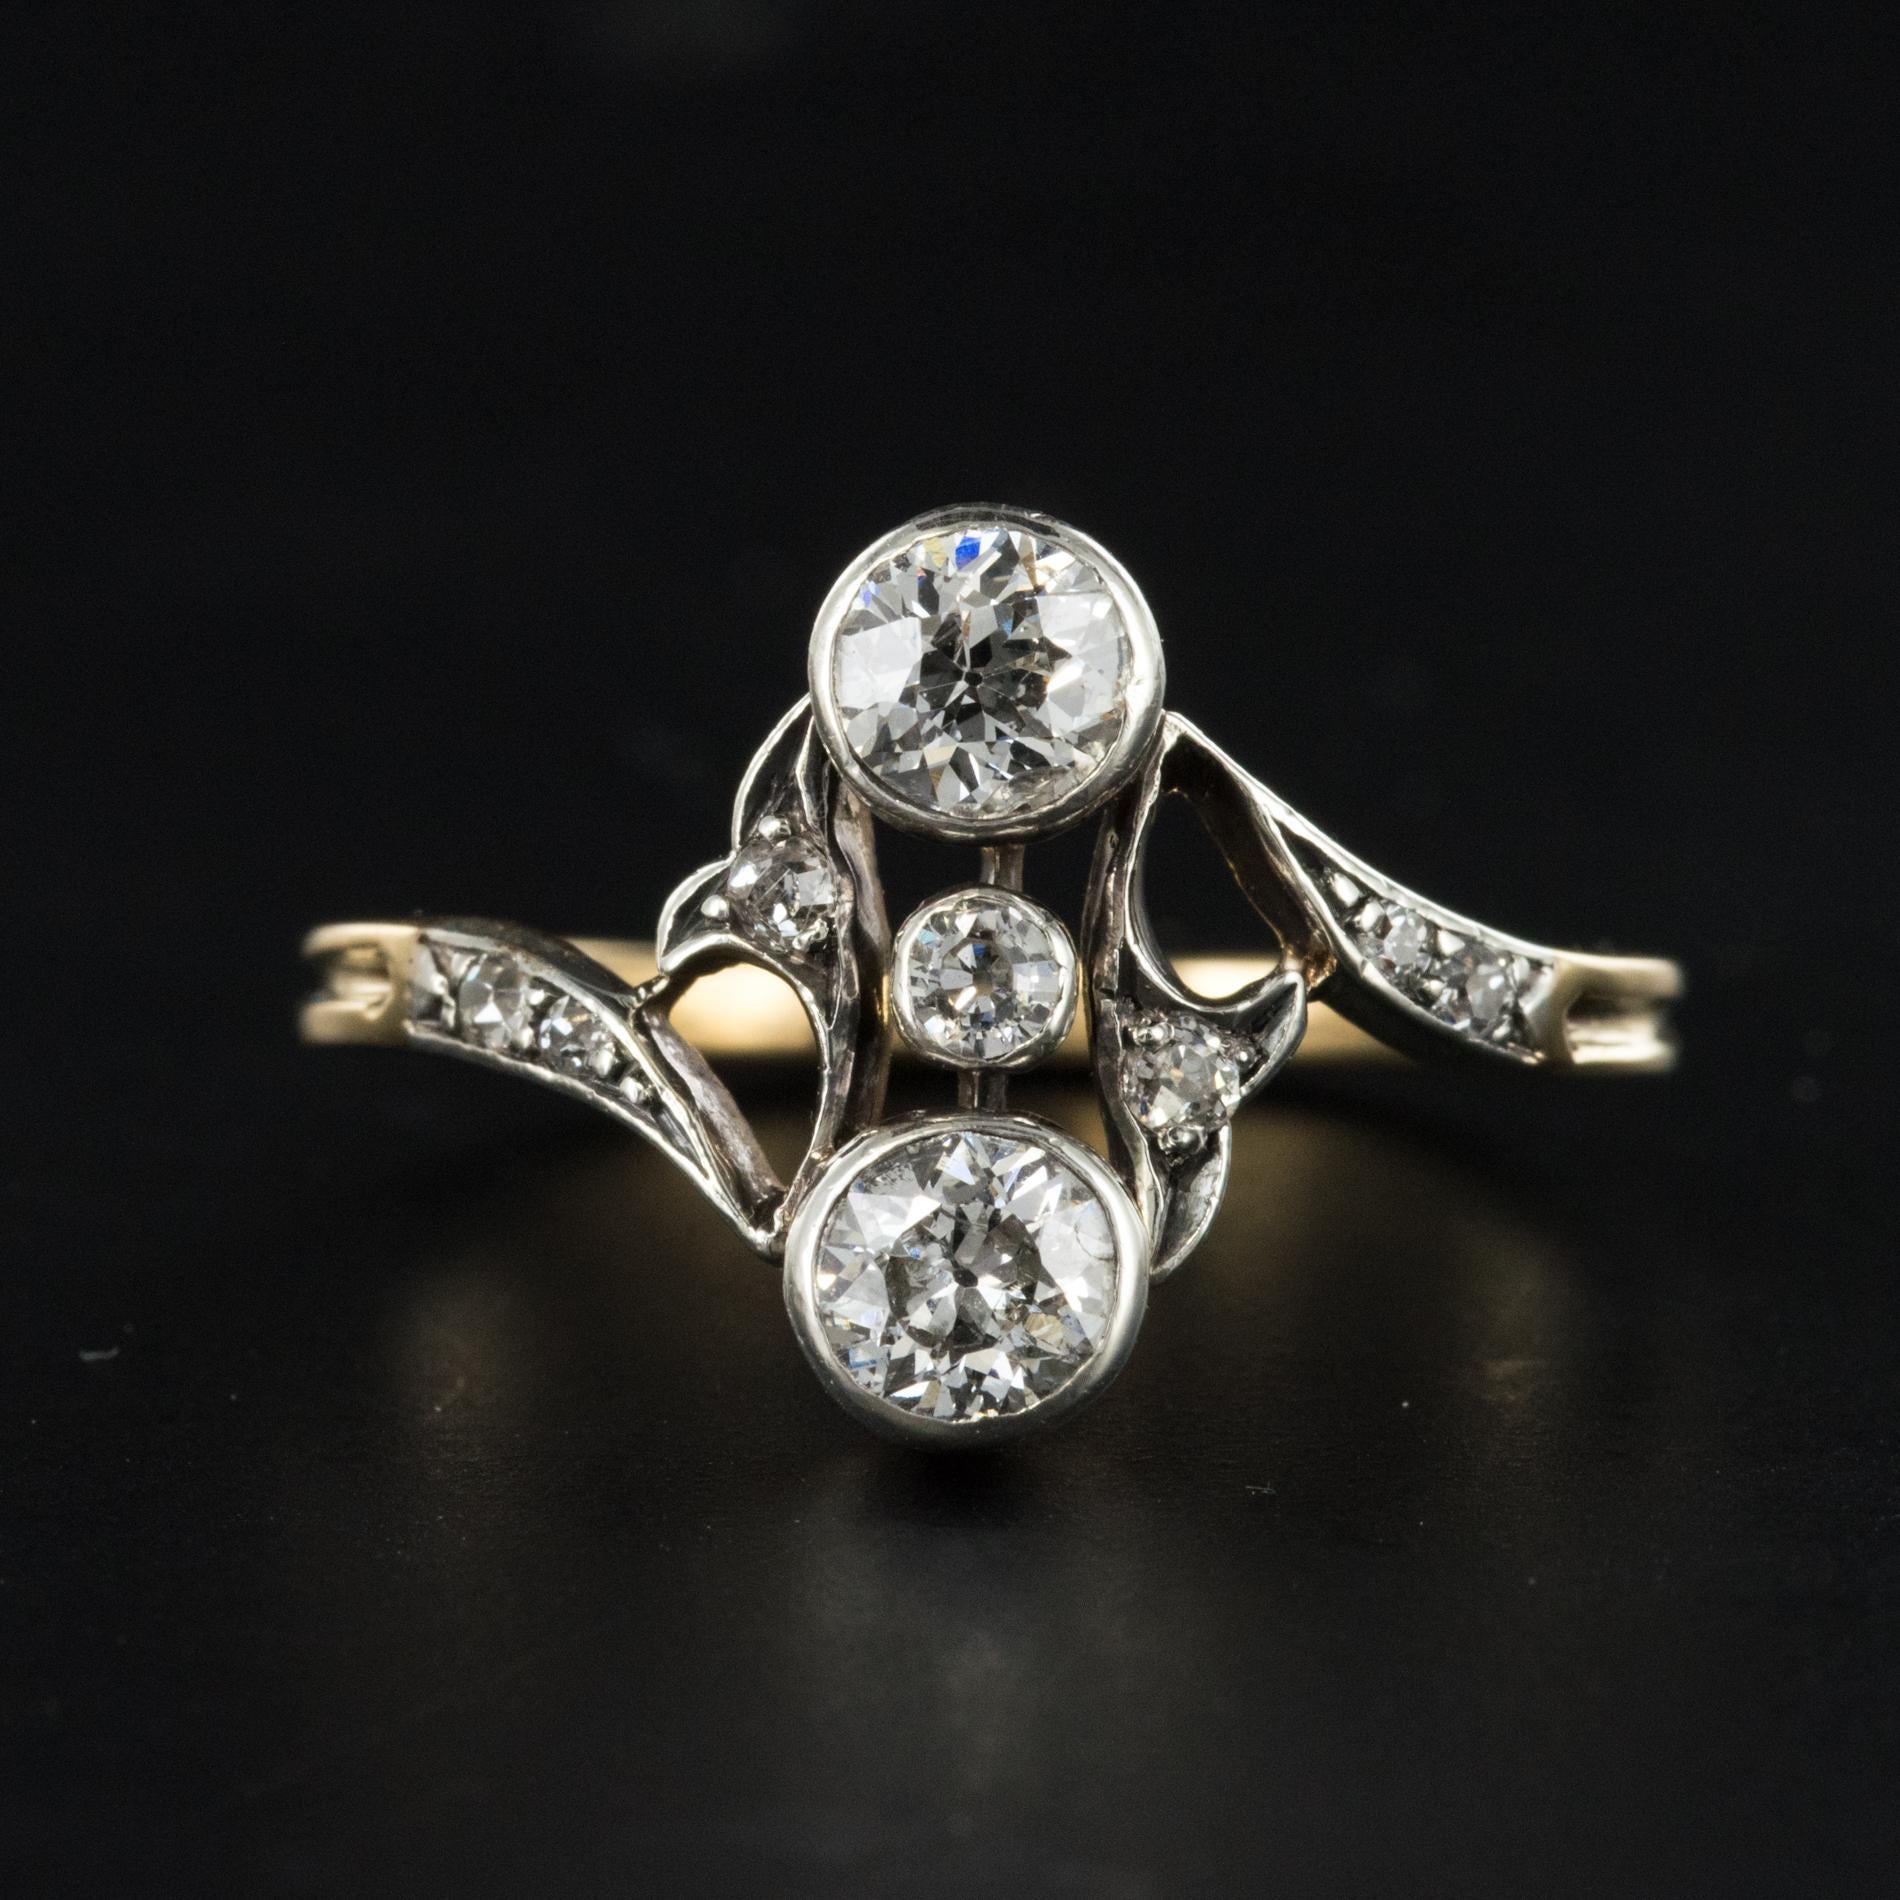 1900s engagement rings